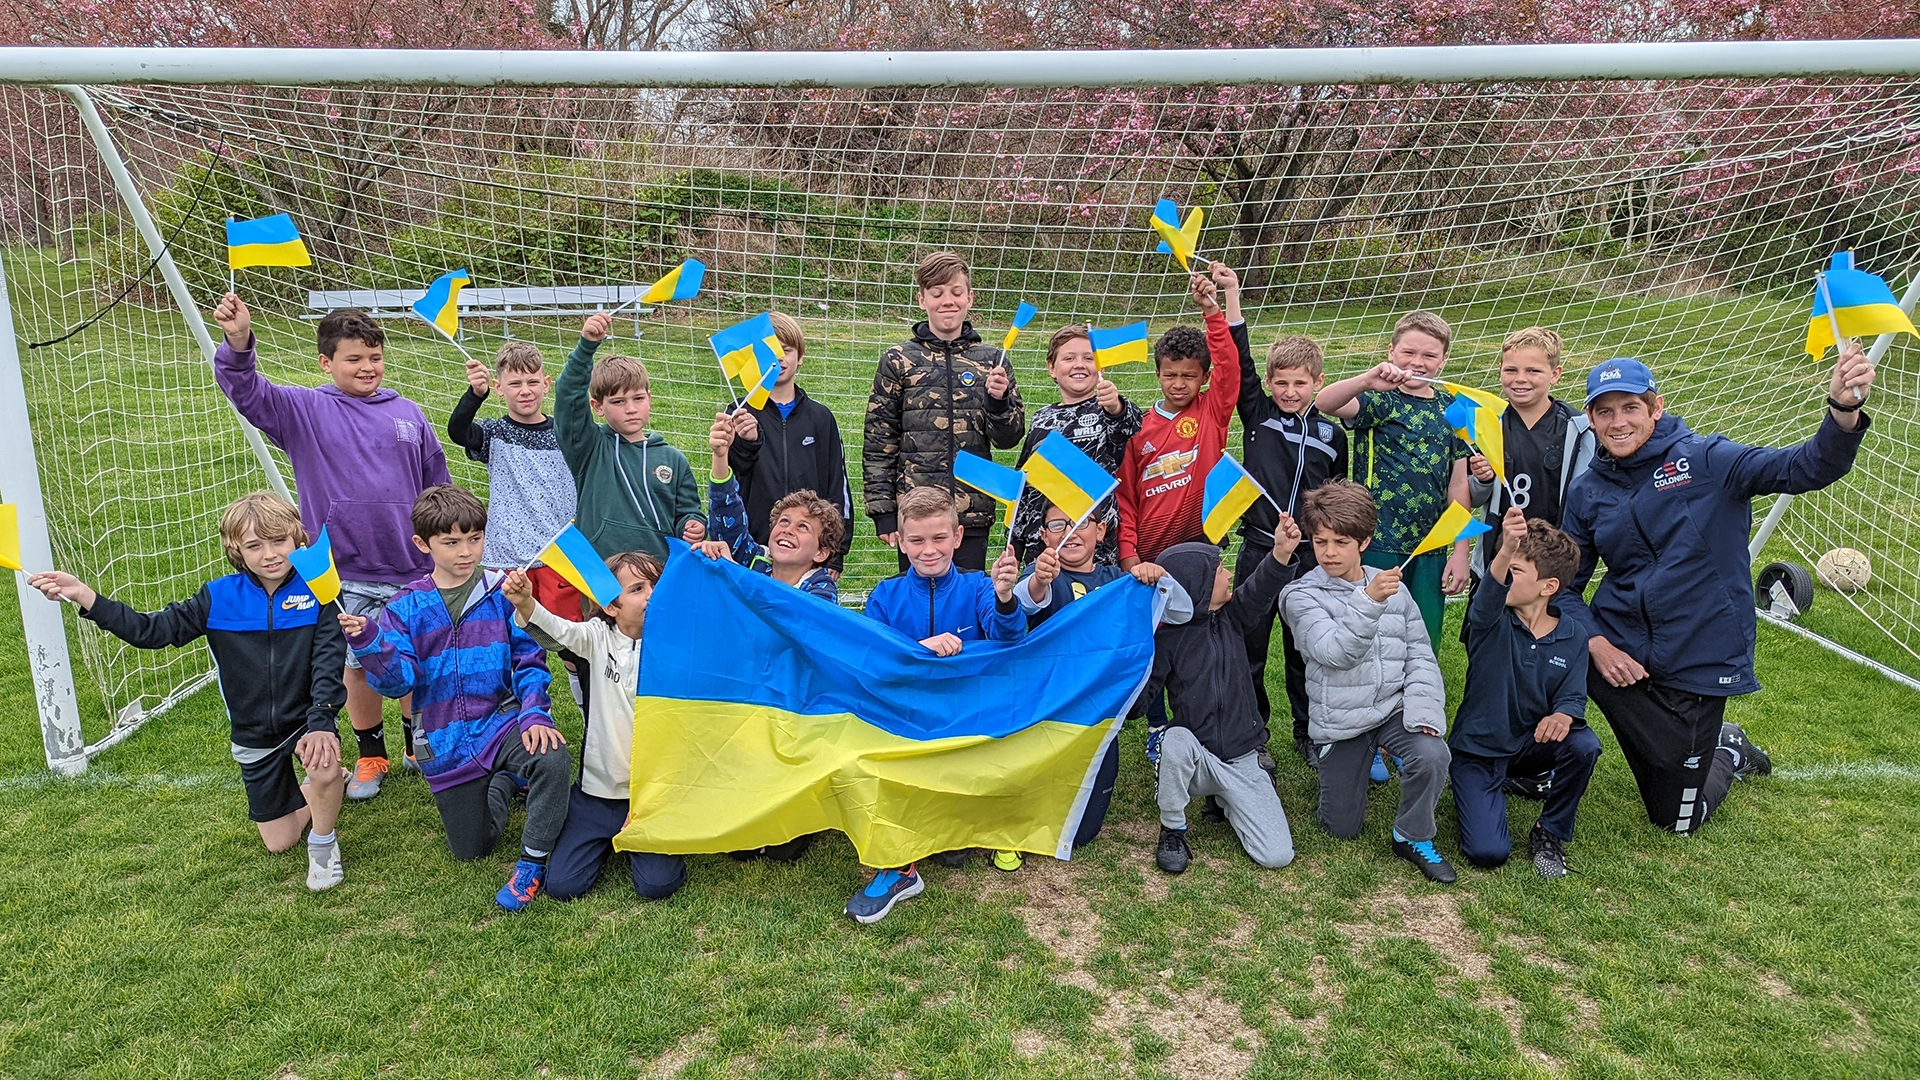 Two Ukrainian refugee boys helped by iLoveUkraine to play soccer on the Southamptons Soccer Club.